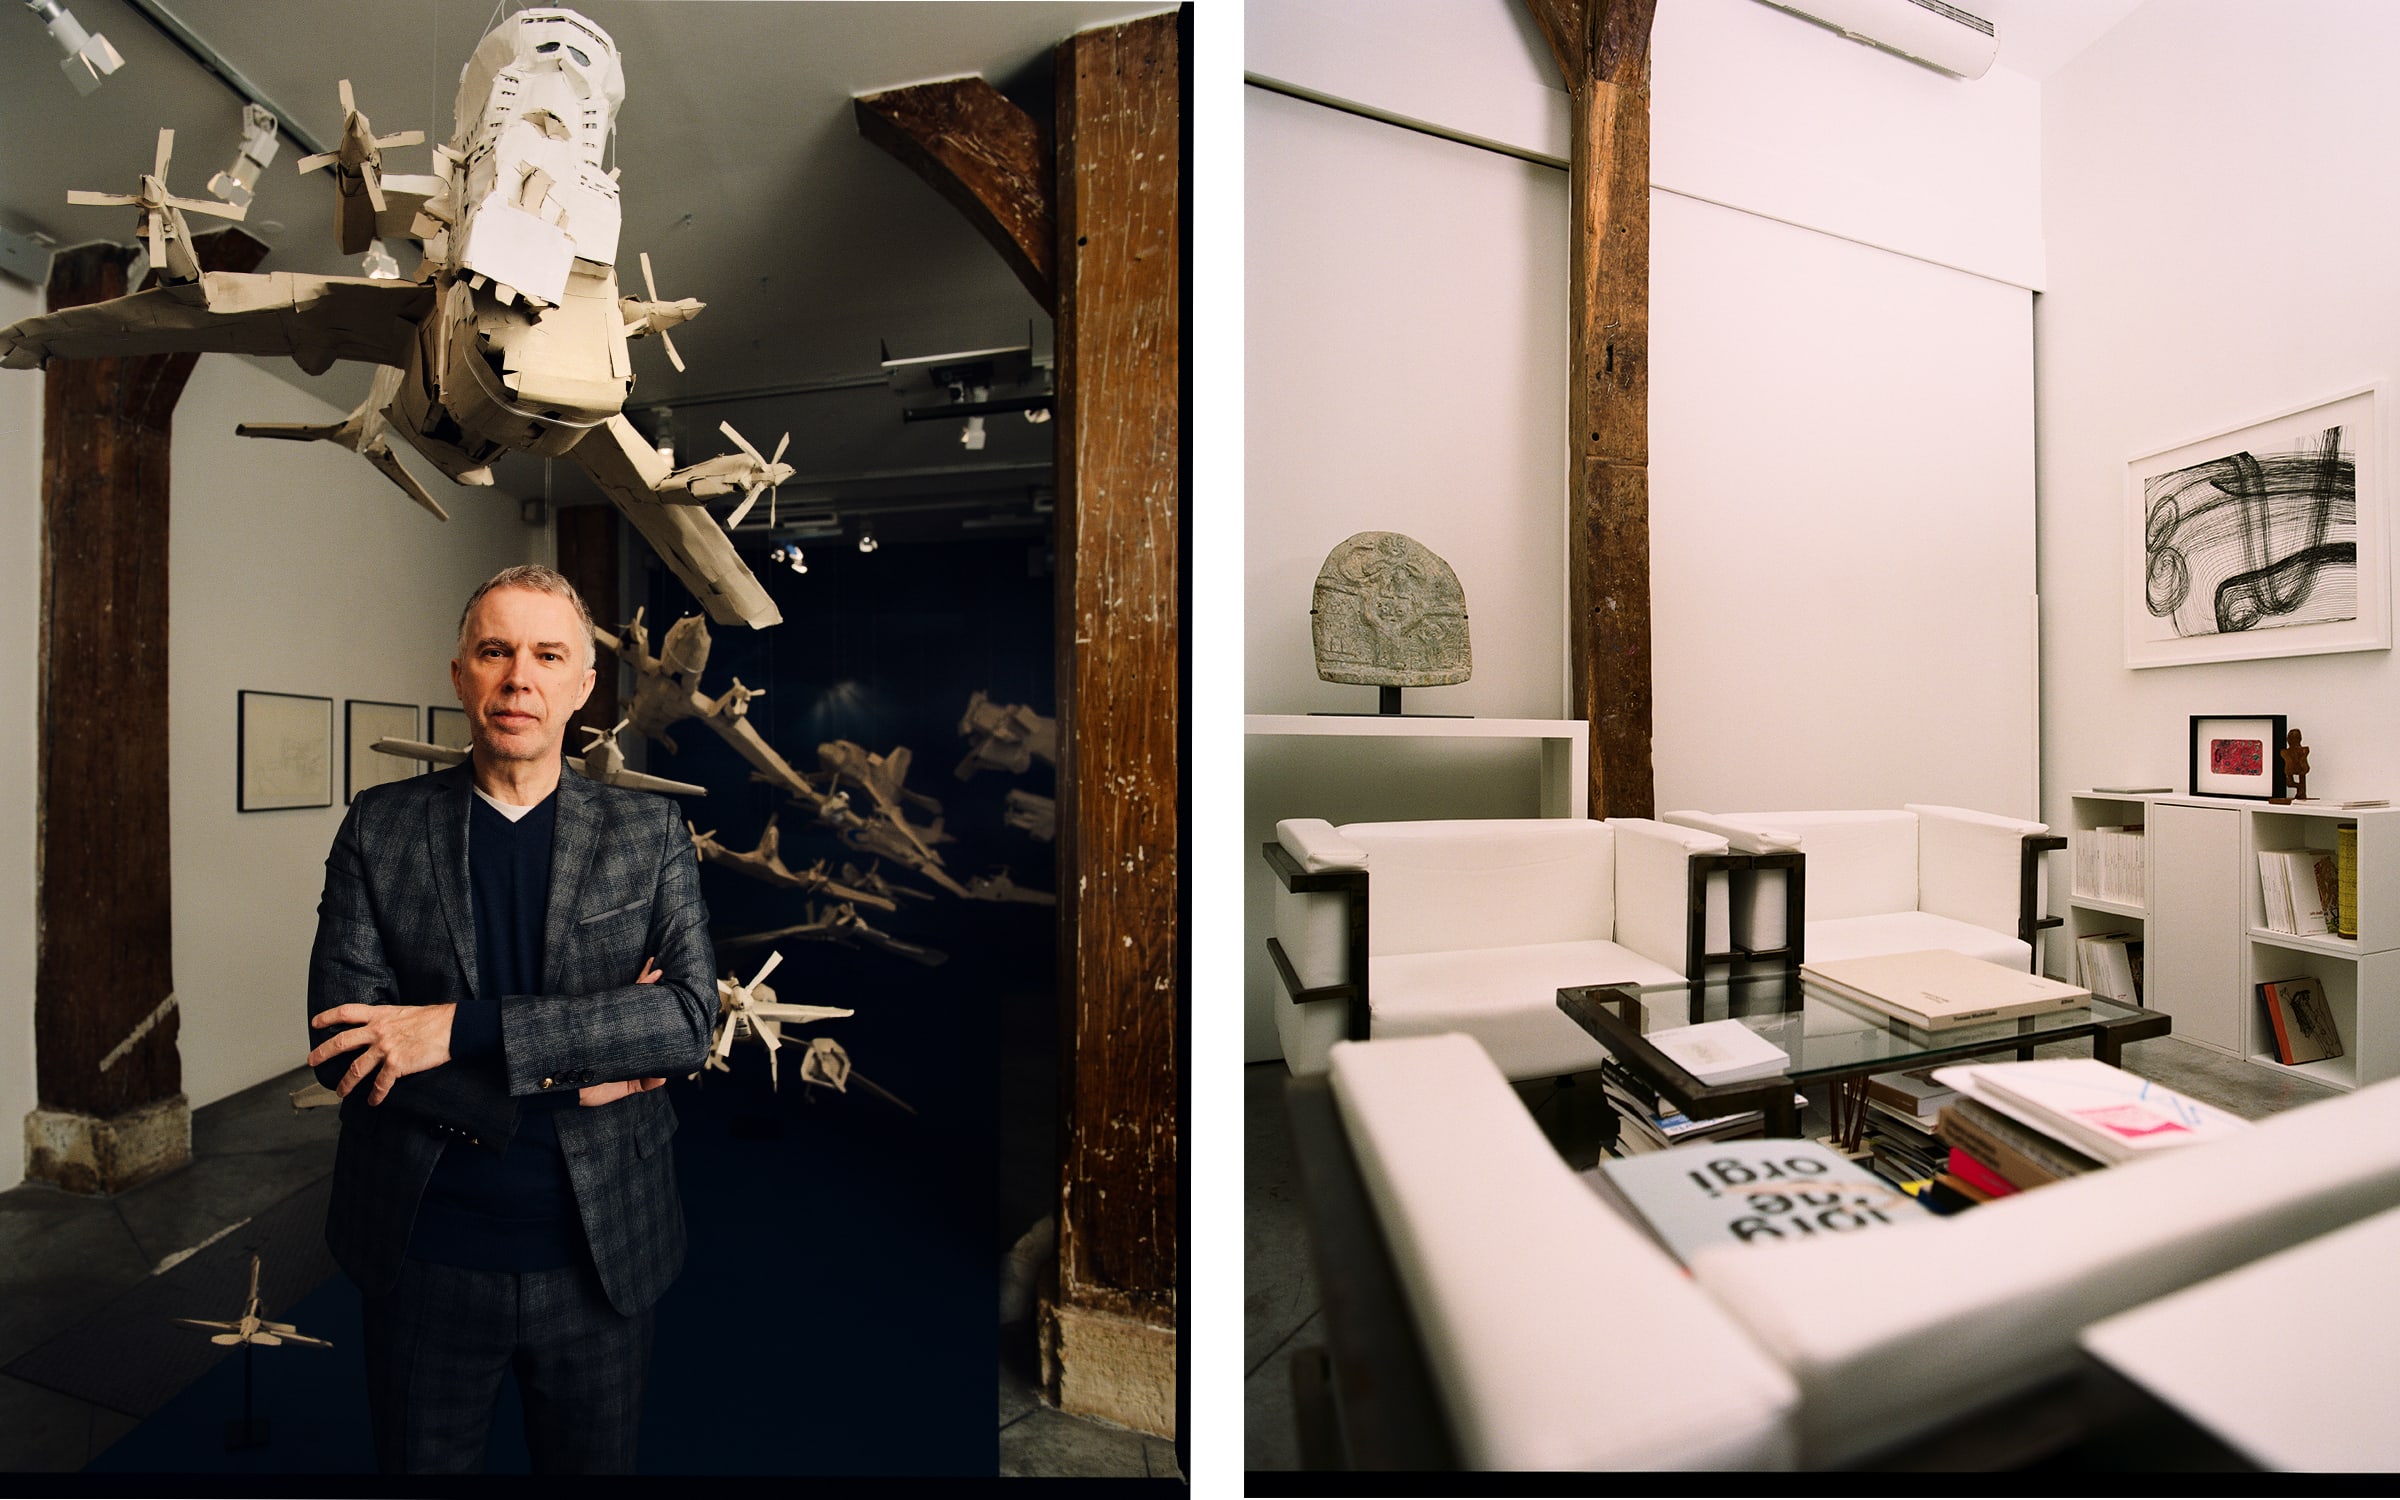 Left: Christian Berst in his gallery. Right: the space's study, featuring some of the published catalogs. Photos by Manuel Obadia-Wills for Paris+ par Art Basel.